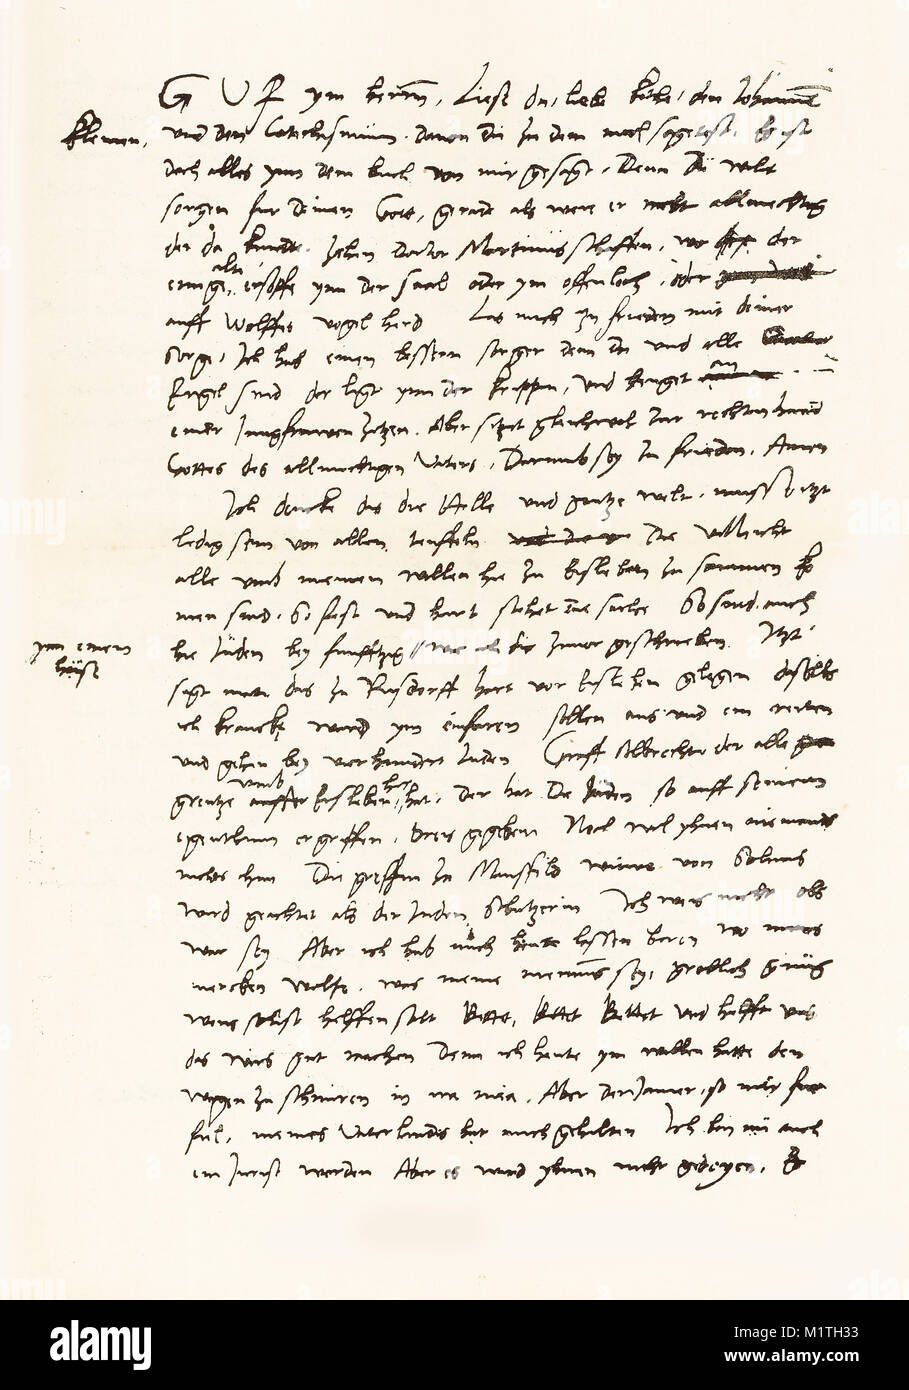 First half of a facsimile of a letter written from Luther to his wife on February 7, 1546. From The Life of Luther by Kostlin, 1900 Stock Photo